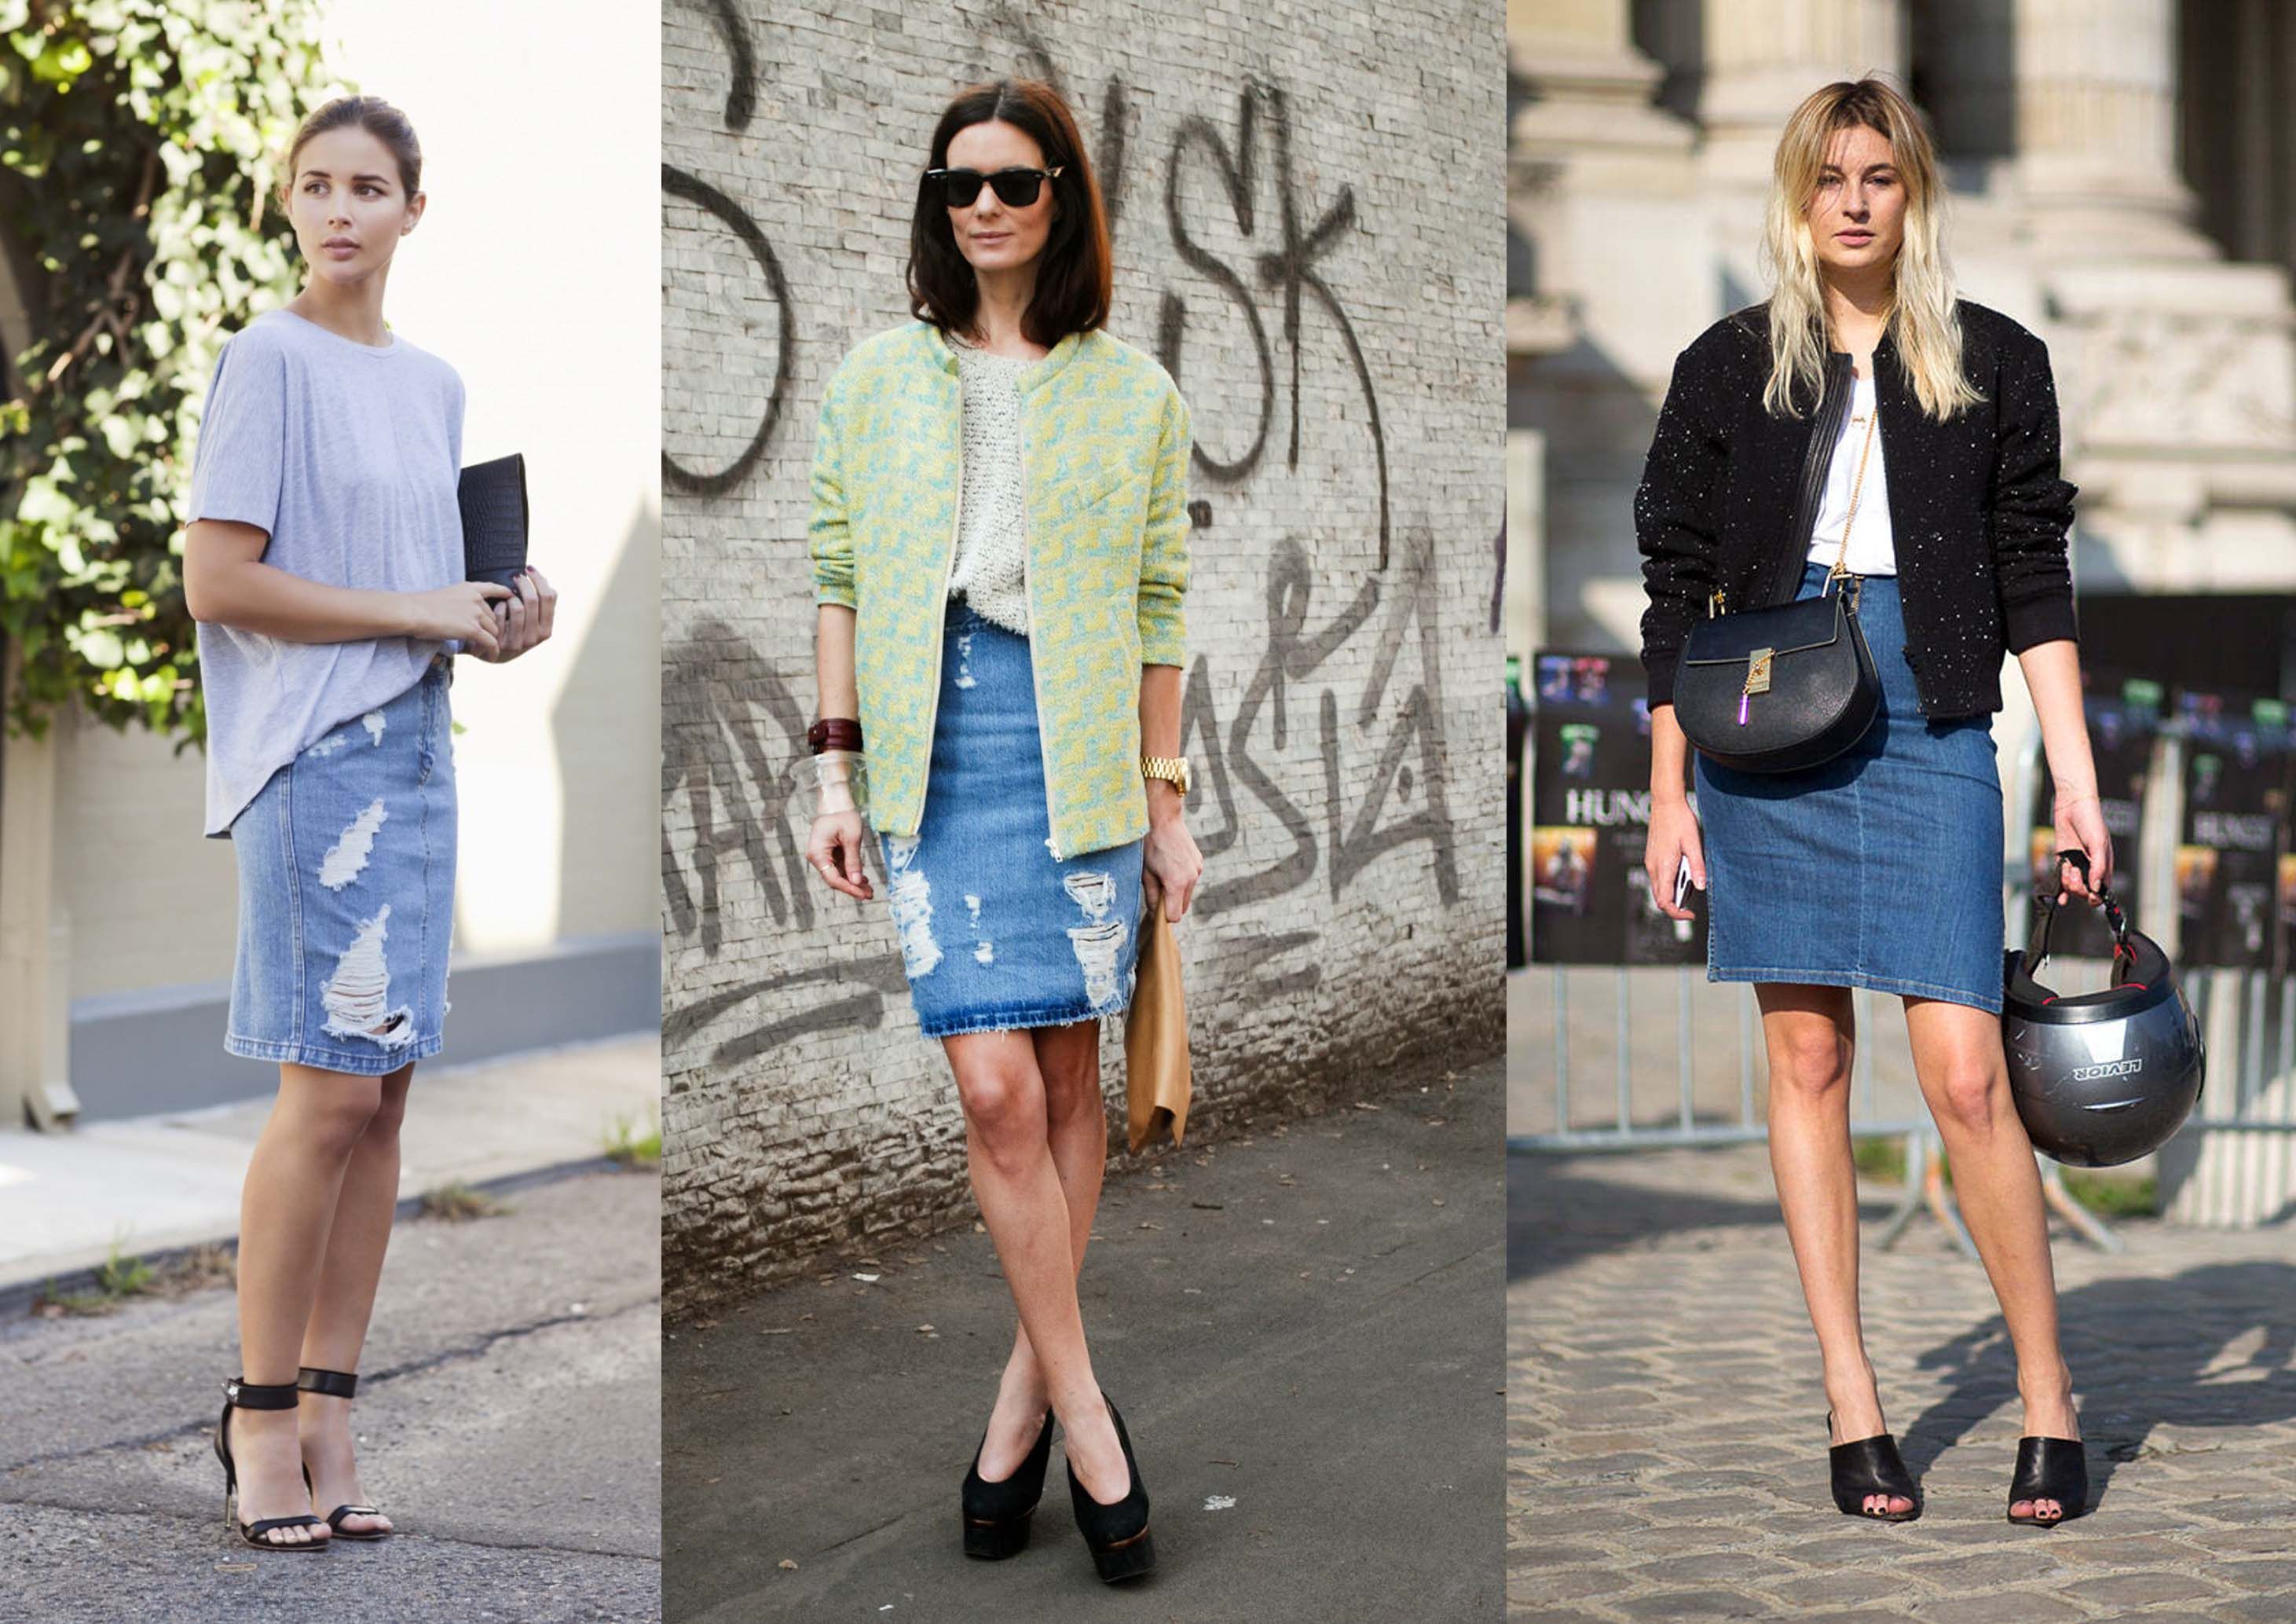 Check Out How to Choose a Denim Skirt Model Based on Body Shape